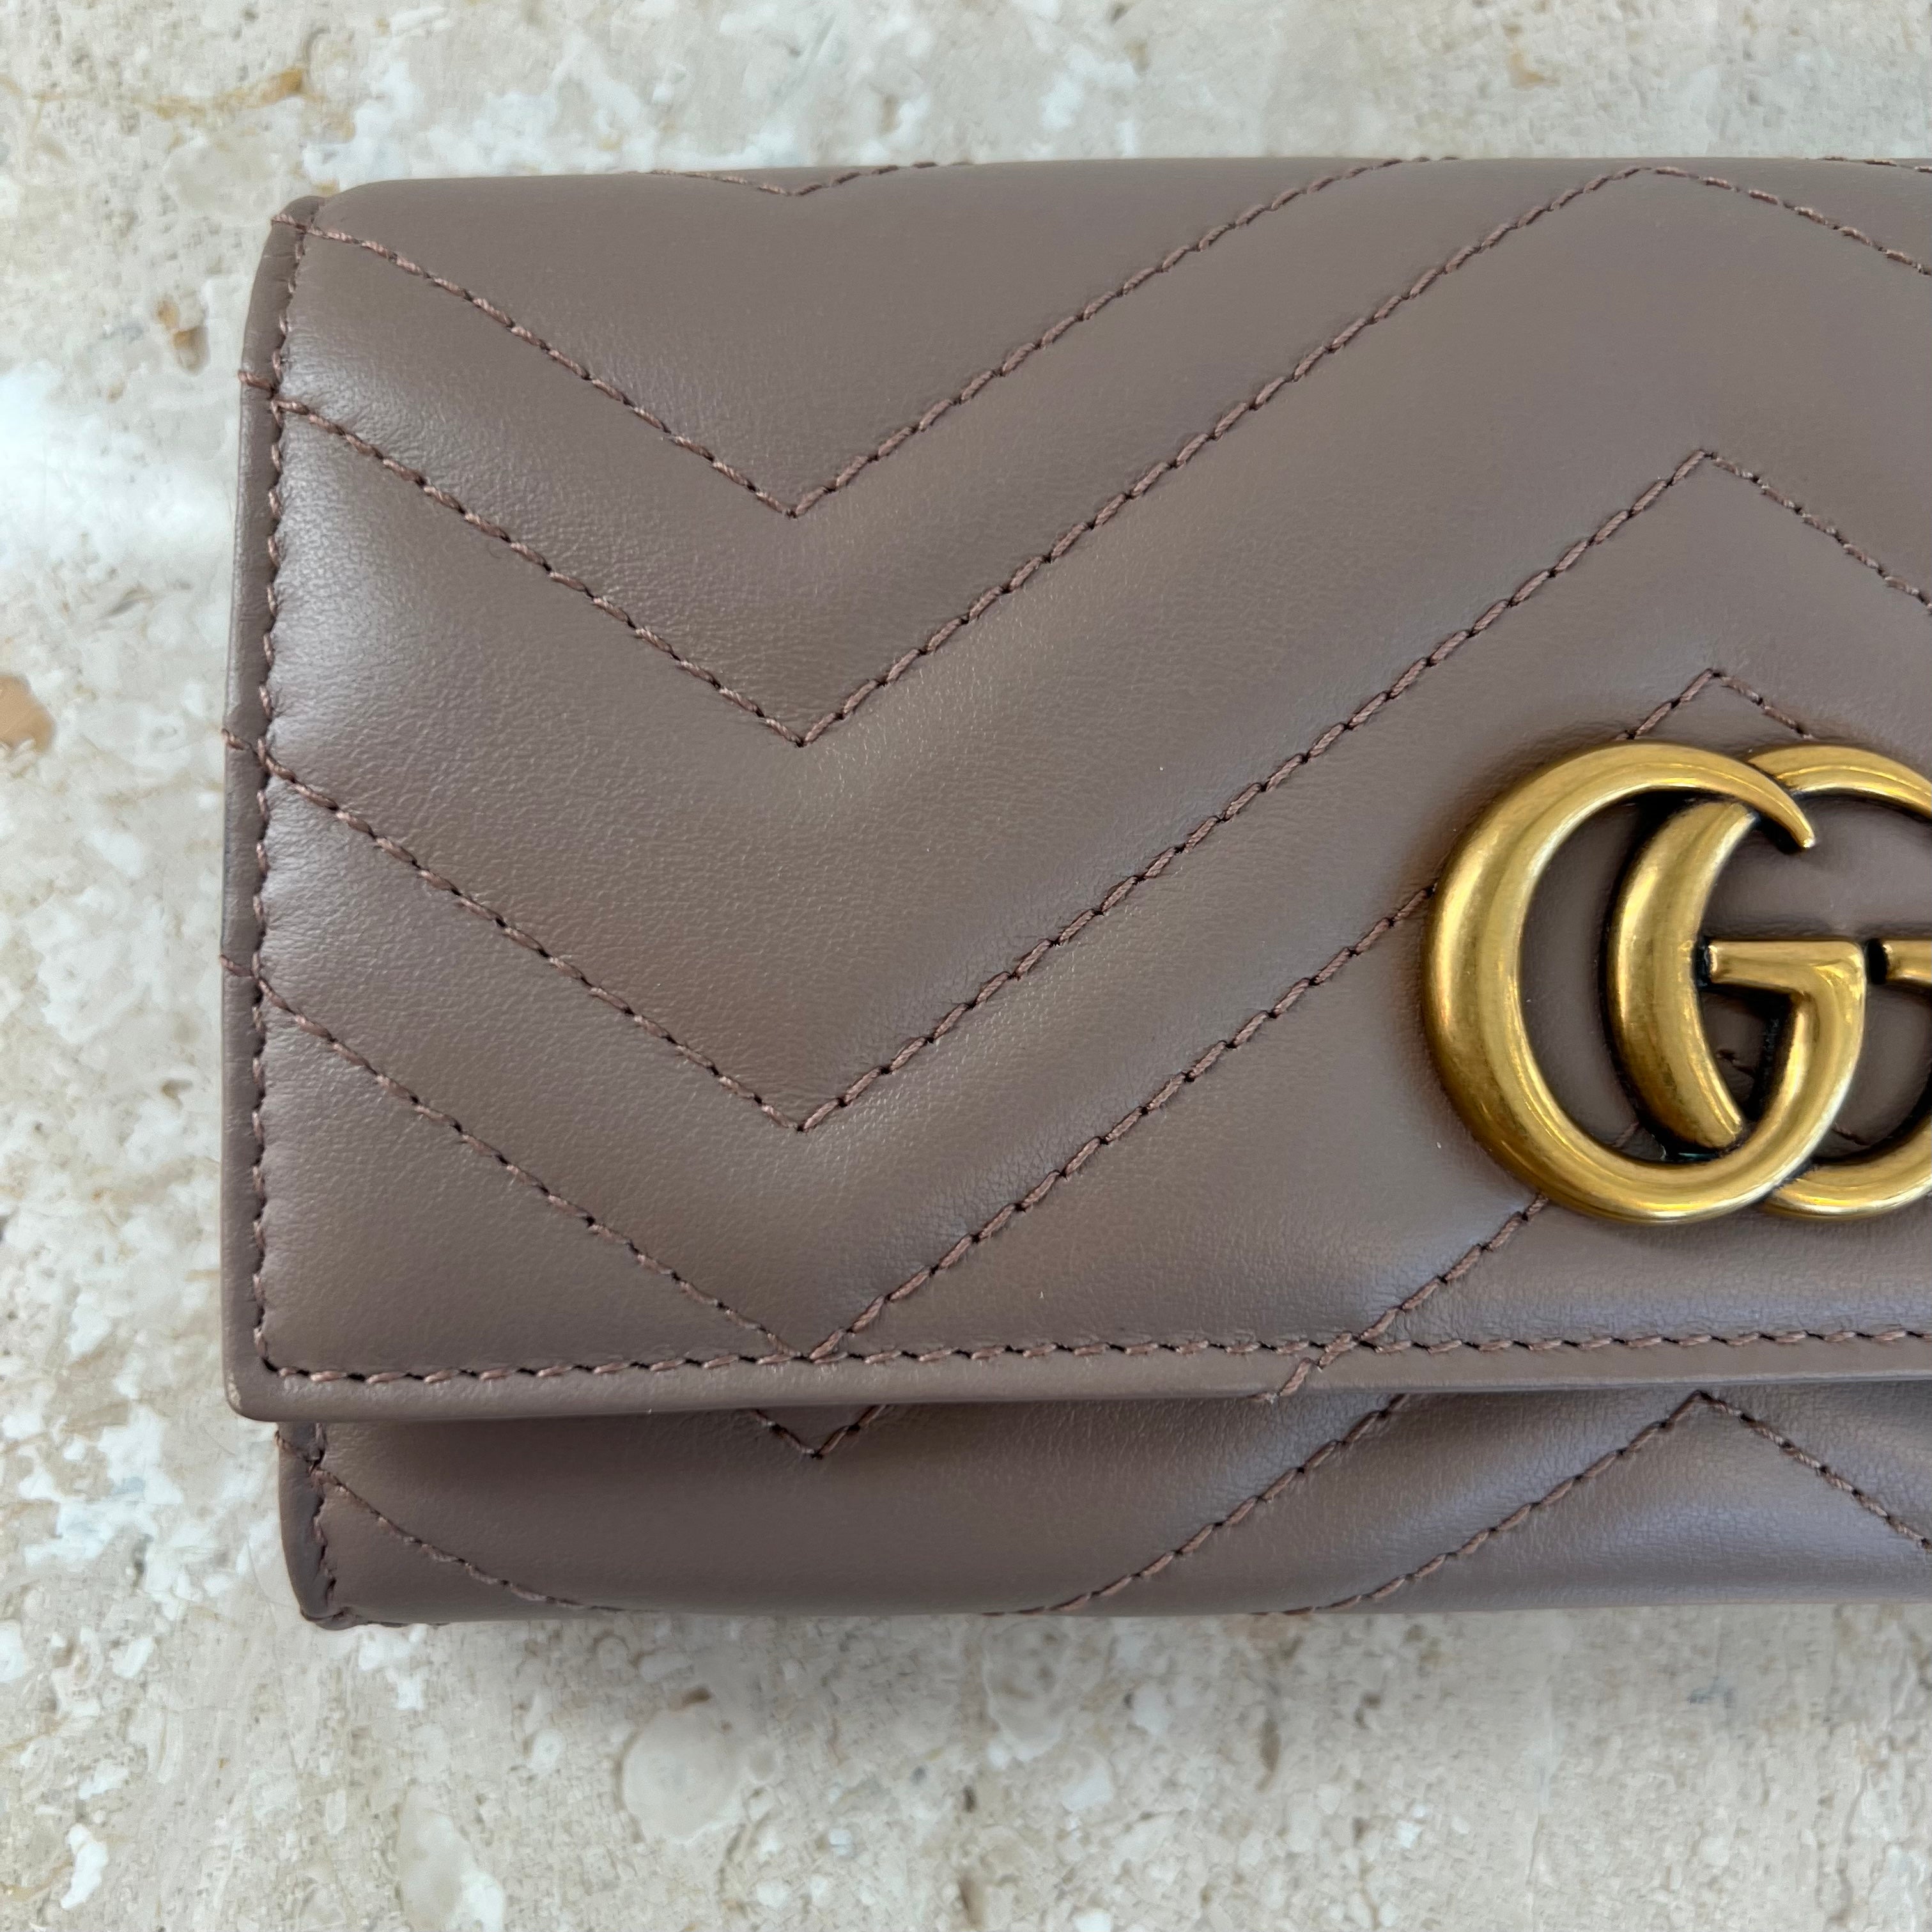 Pre-Owned GUCCI Marmont Continental Wallet